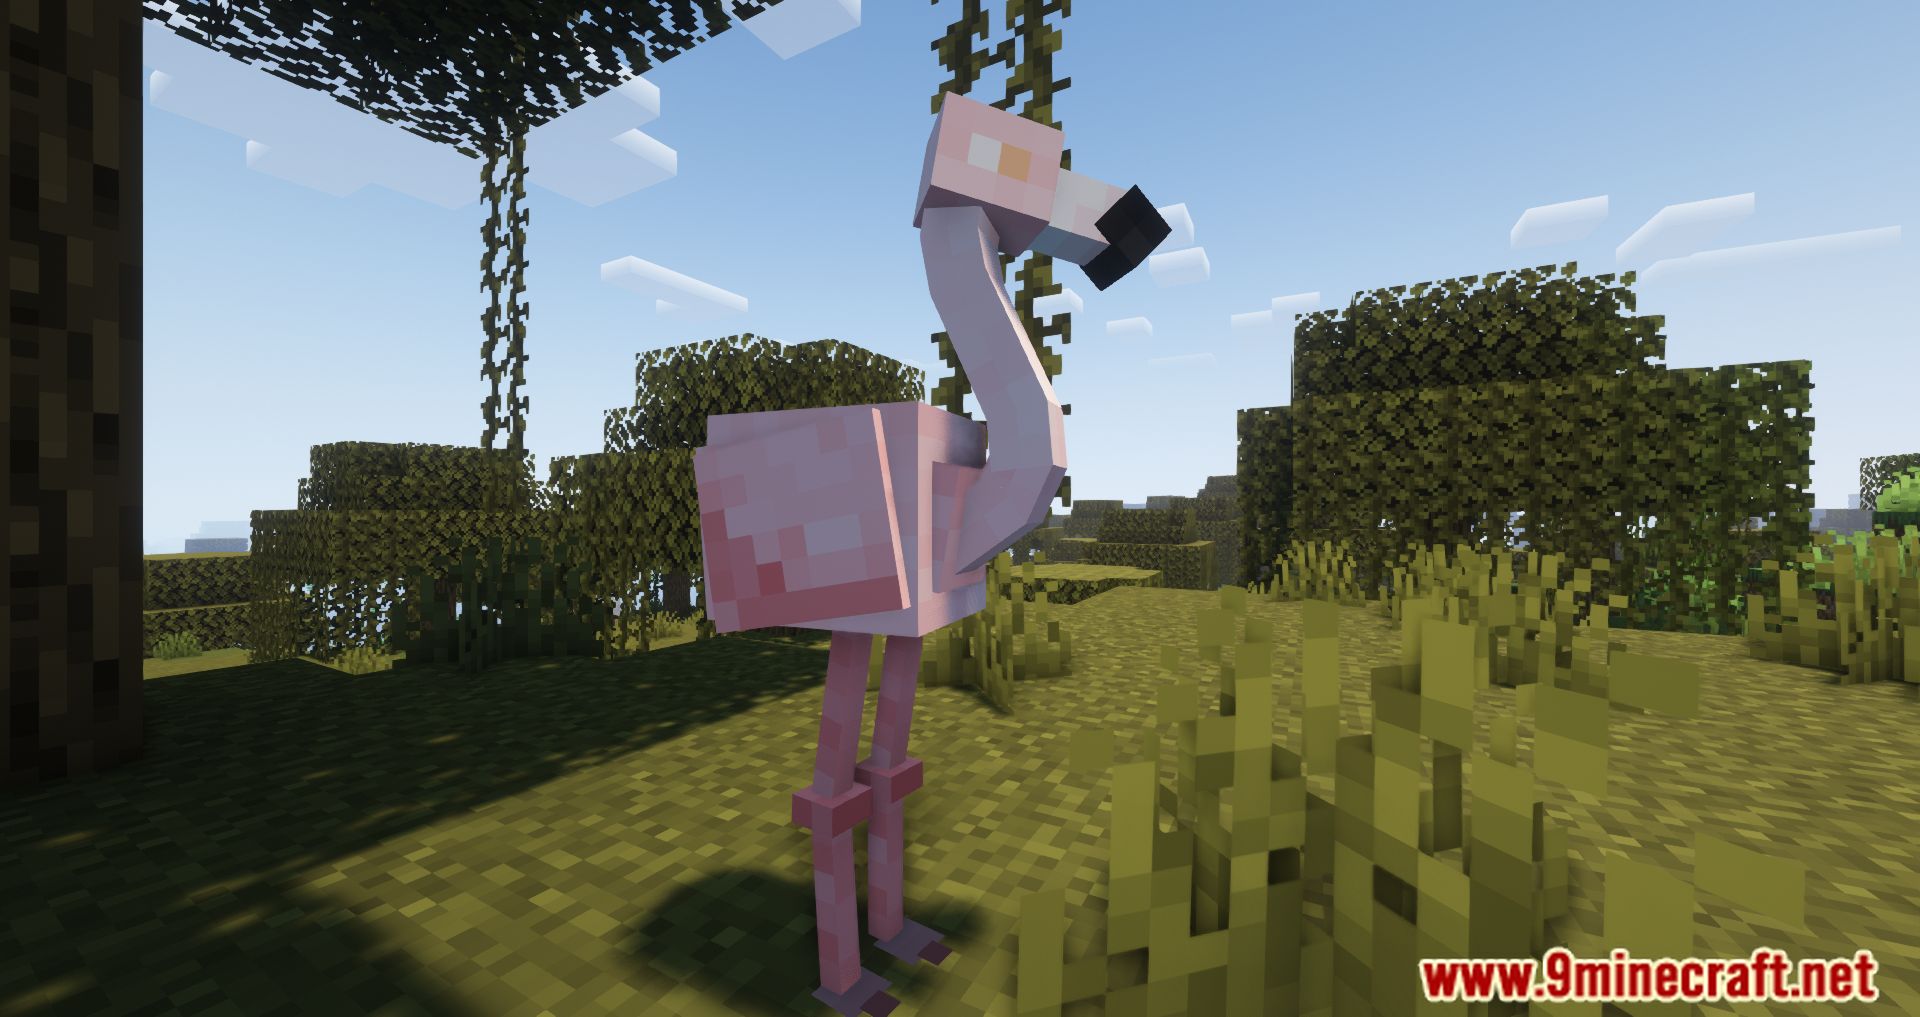 Flamingo, oh, oh, oh Mod (1.16.5, 1.15.2) - Lovely Creature With Pink Color 3